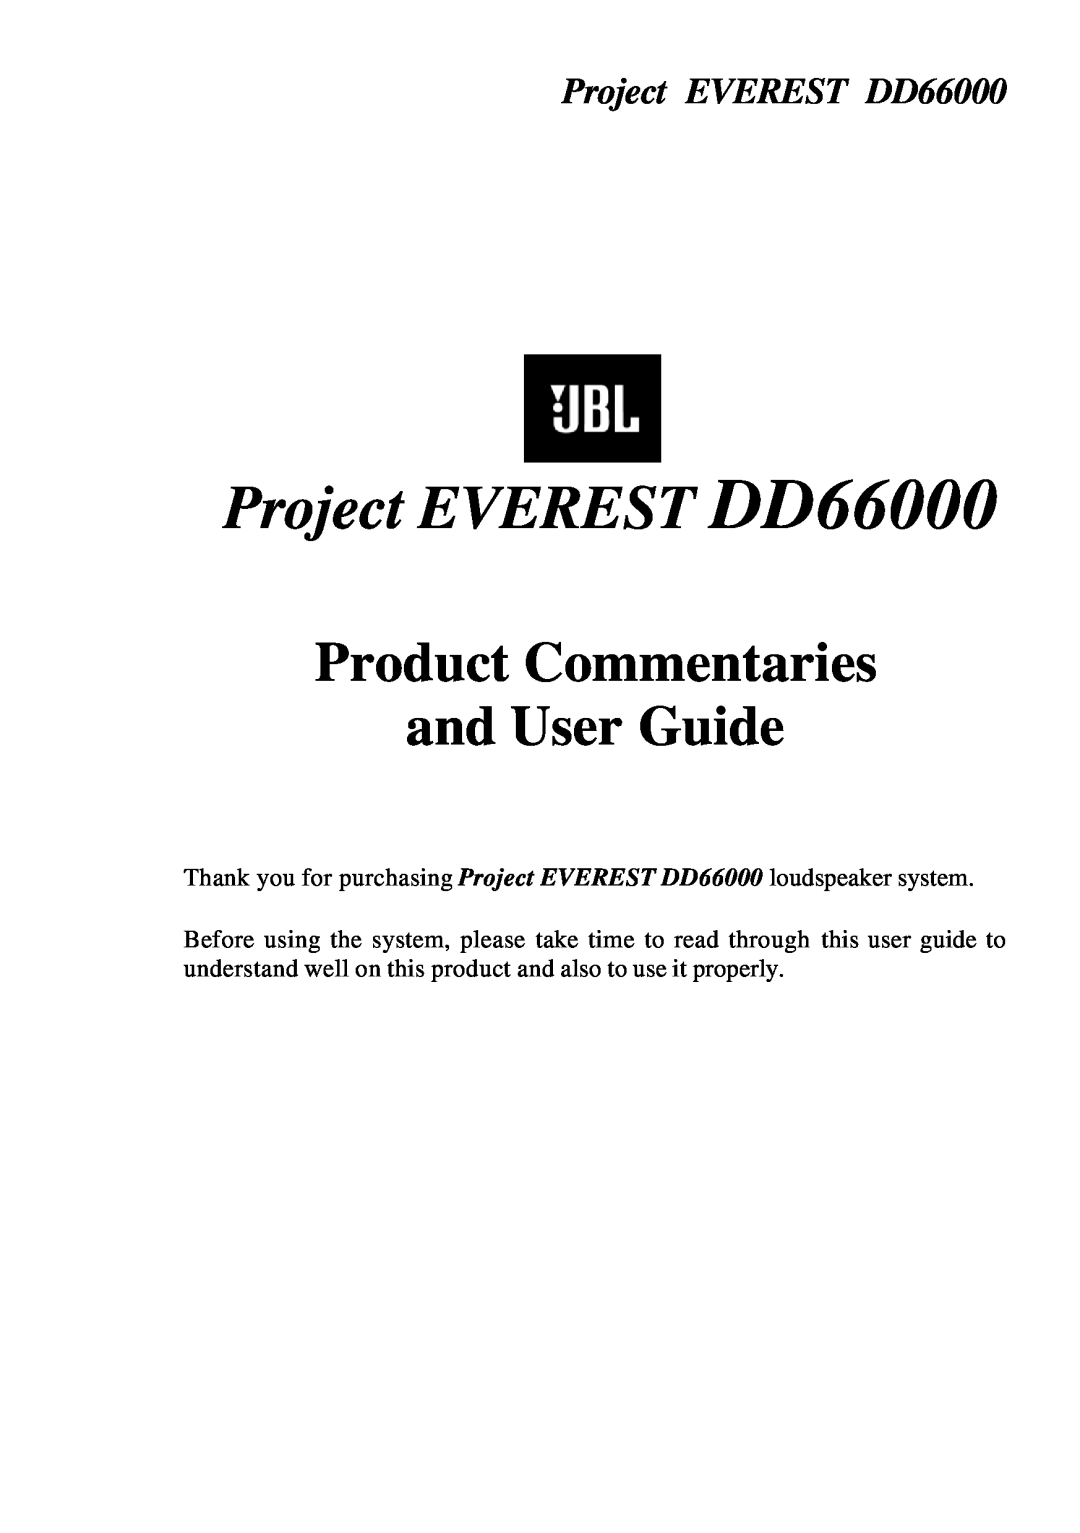 JBL manual Project EVEREST DD66000, Product Commentaries and User Guide 